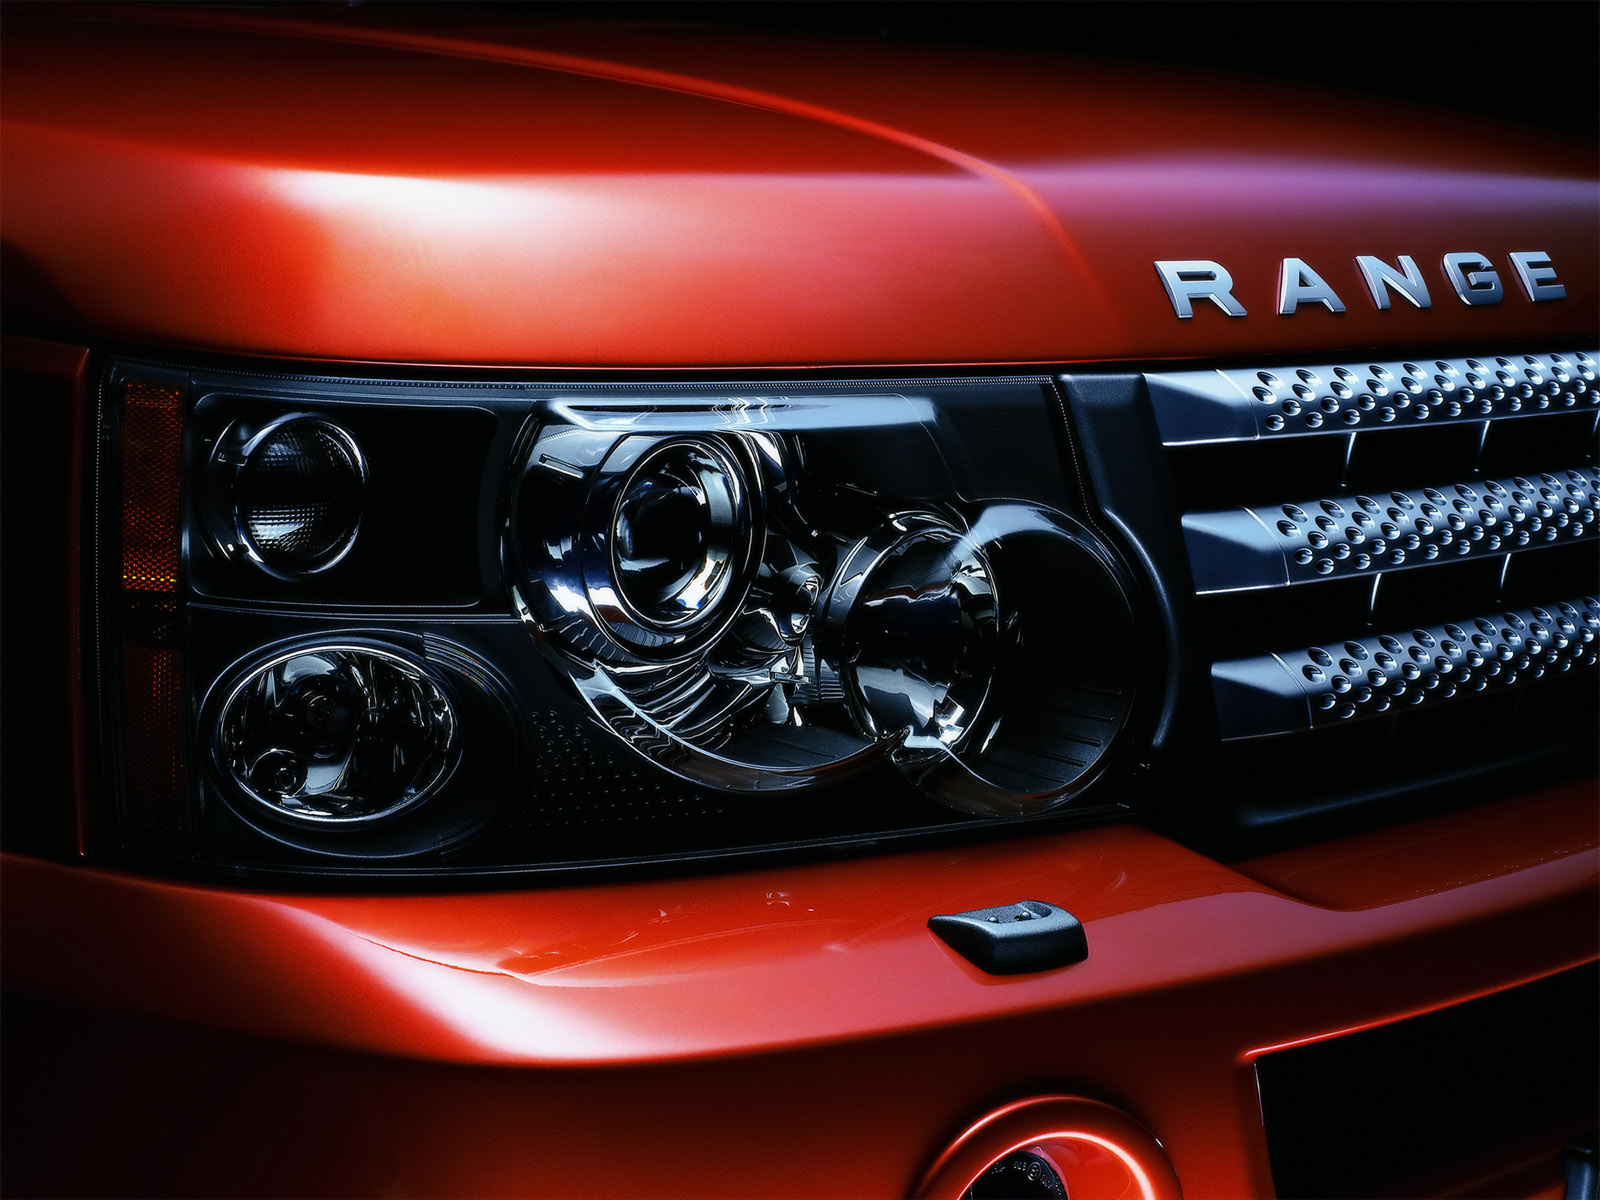 Range Rover Sport Wallpaper Image Collections Of